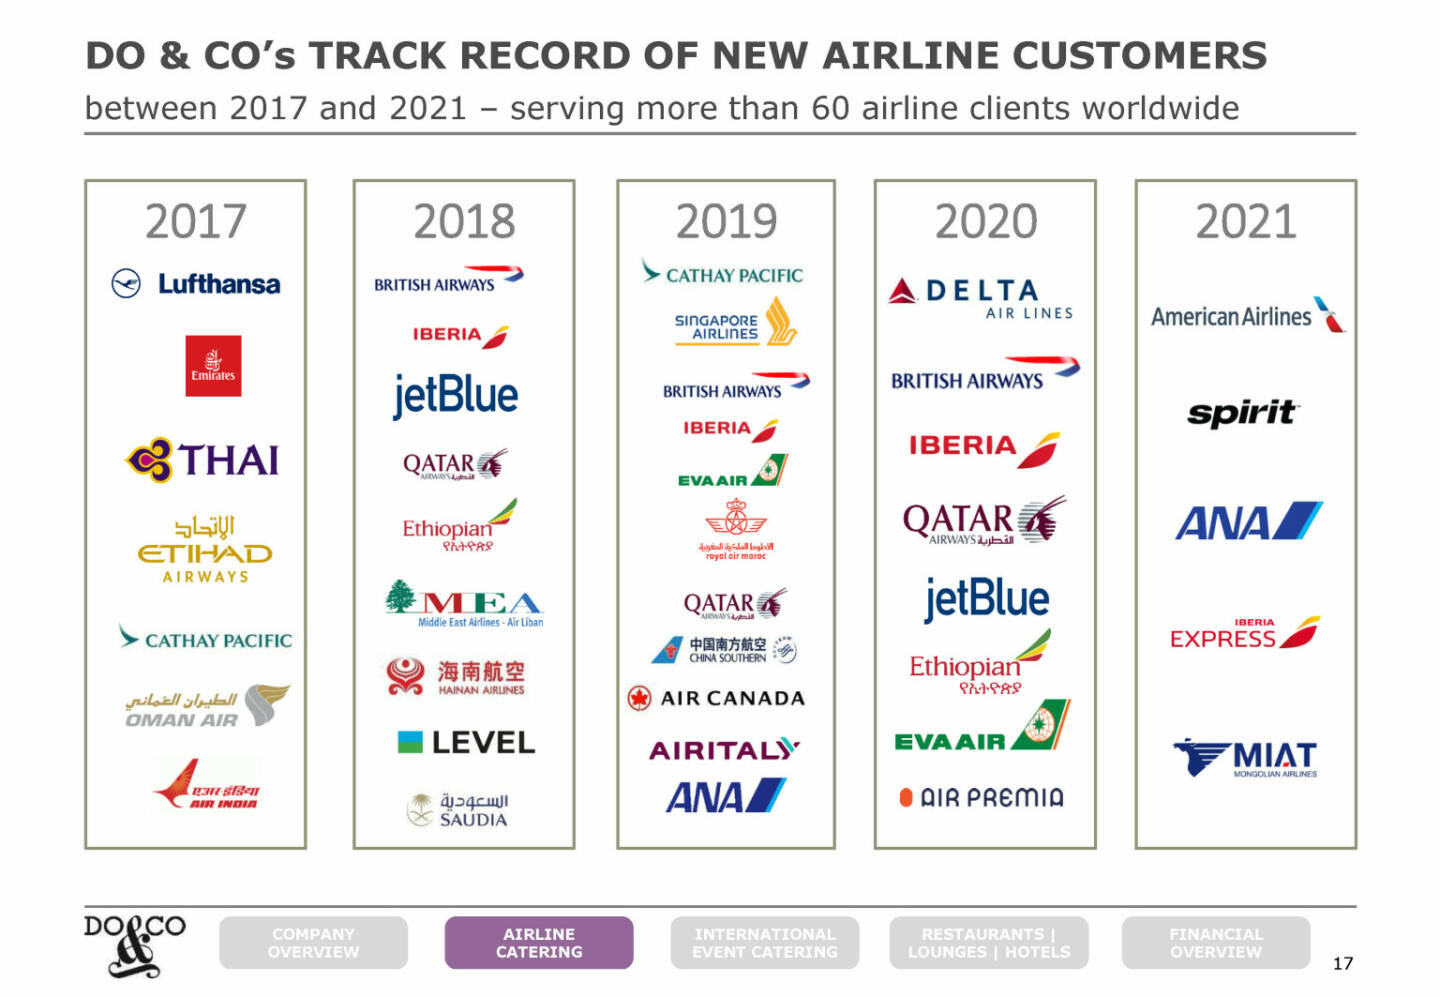 Do&Co - TRACK RECORD OF NEW AIRLINE CUSTOMERS